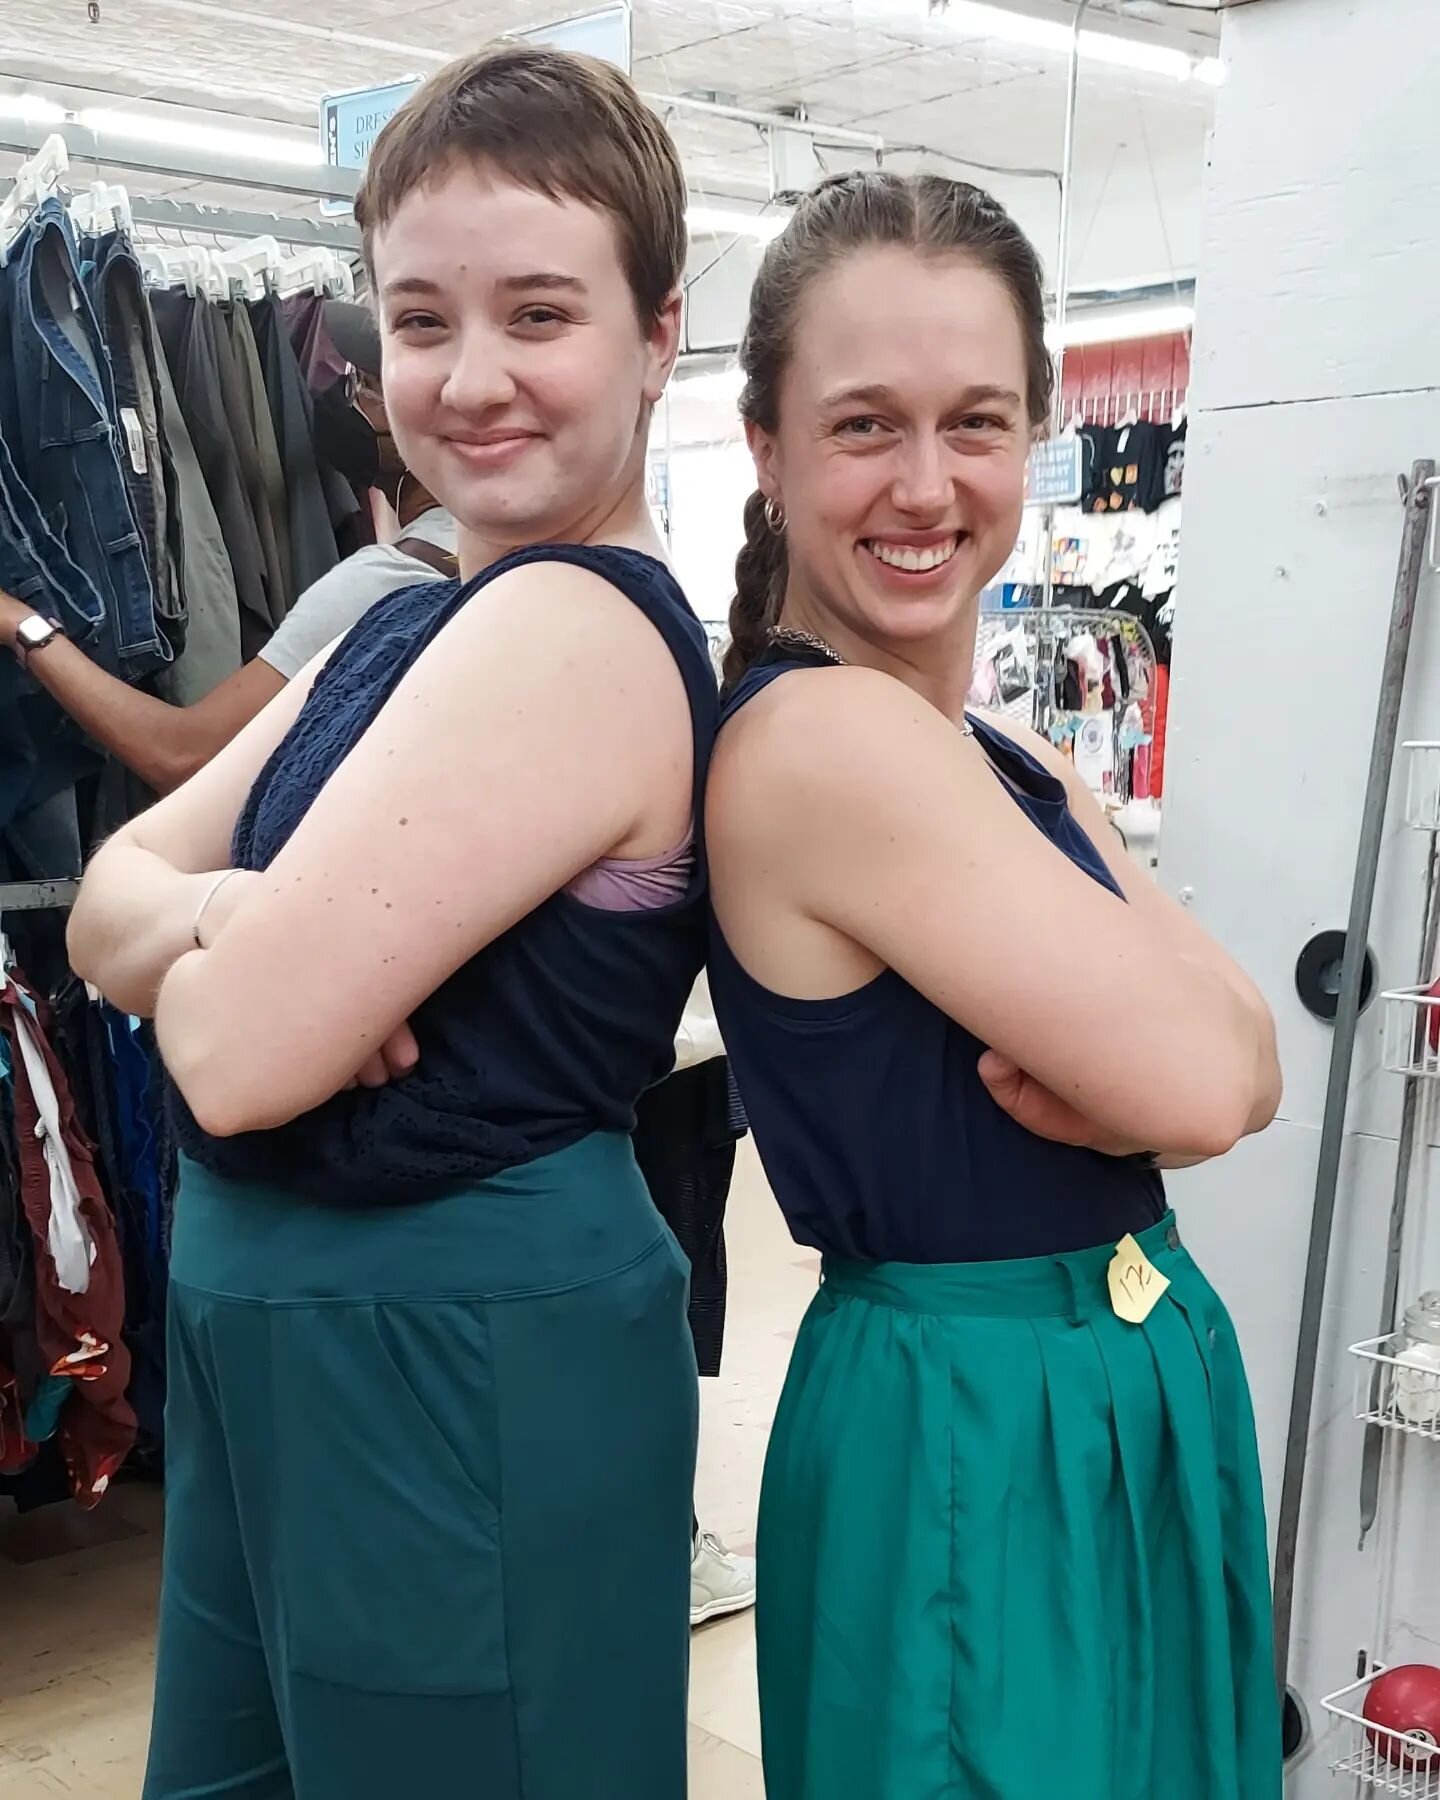 One of the cool things we do as a company is go thrift shopping for costumes! It's fun, environmentally conscious, lets everyone get a costume that's comfortable for them and saves some money! 
.
.
.
#dancecreatives #choreographyprocess #choreography